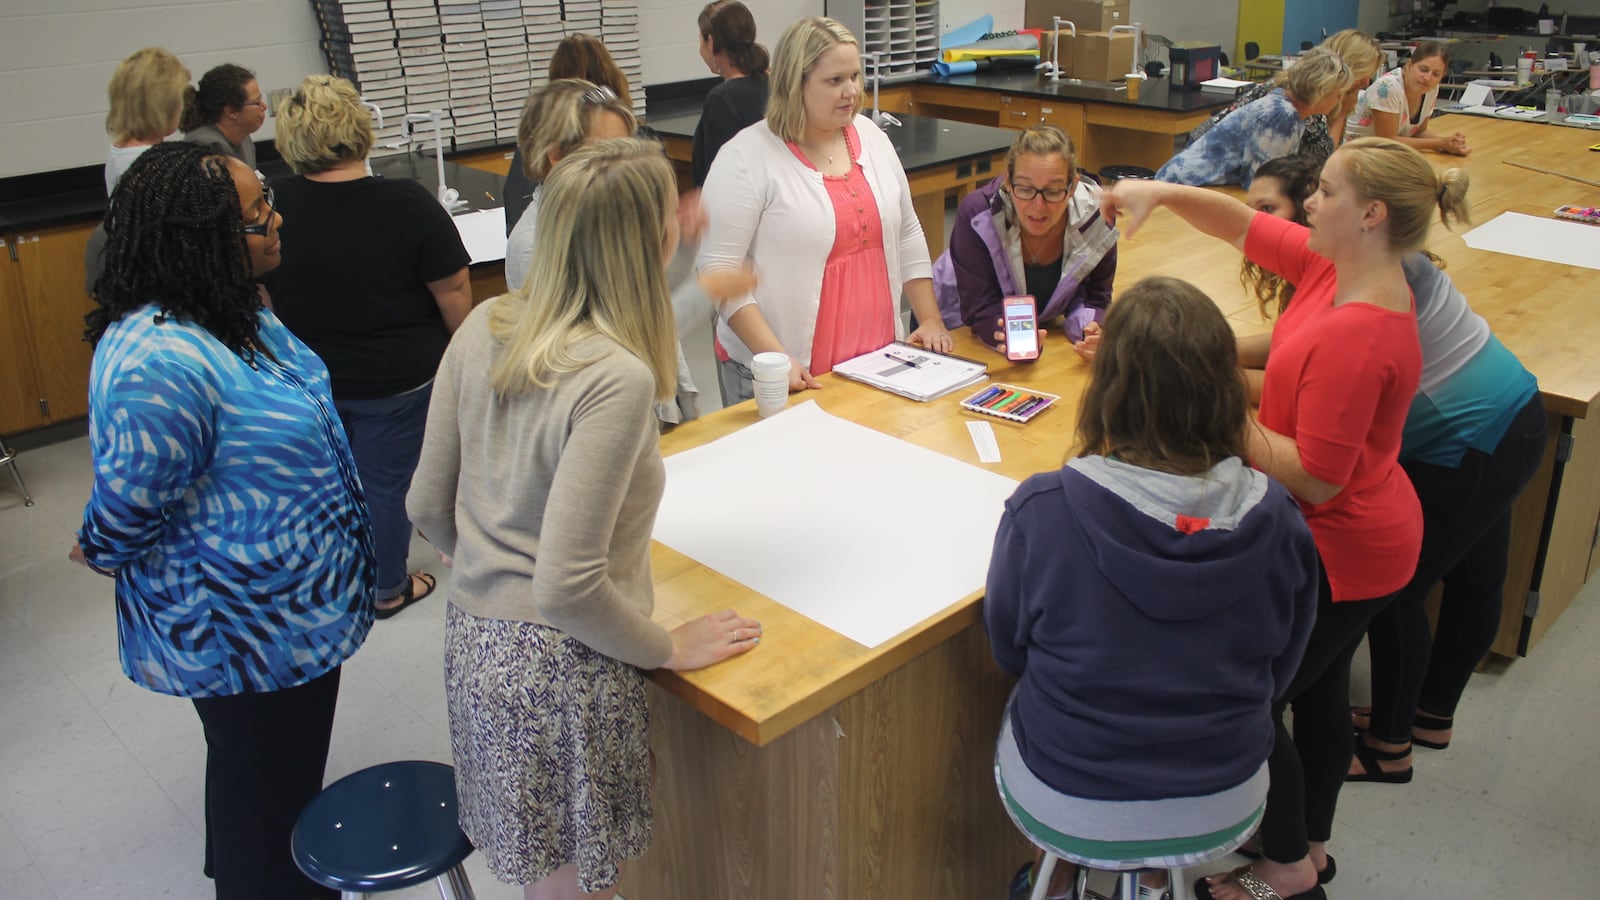 Karyn Bailey (left), a facilitator from Williamson County Schools, coaches elementary school teachers during a 2017 exercise on Tennessee’s revised standards for English language arts as part of a two-day training at La Vergne High School, one of 11 training sites across the state.